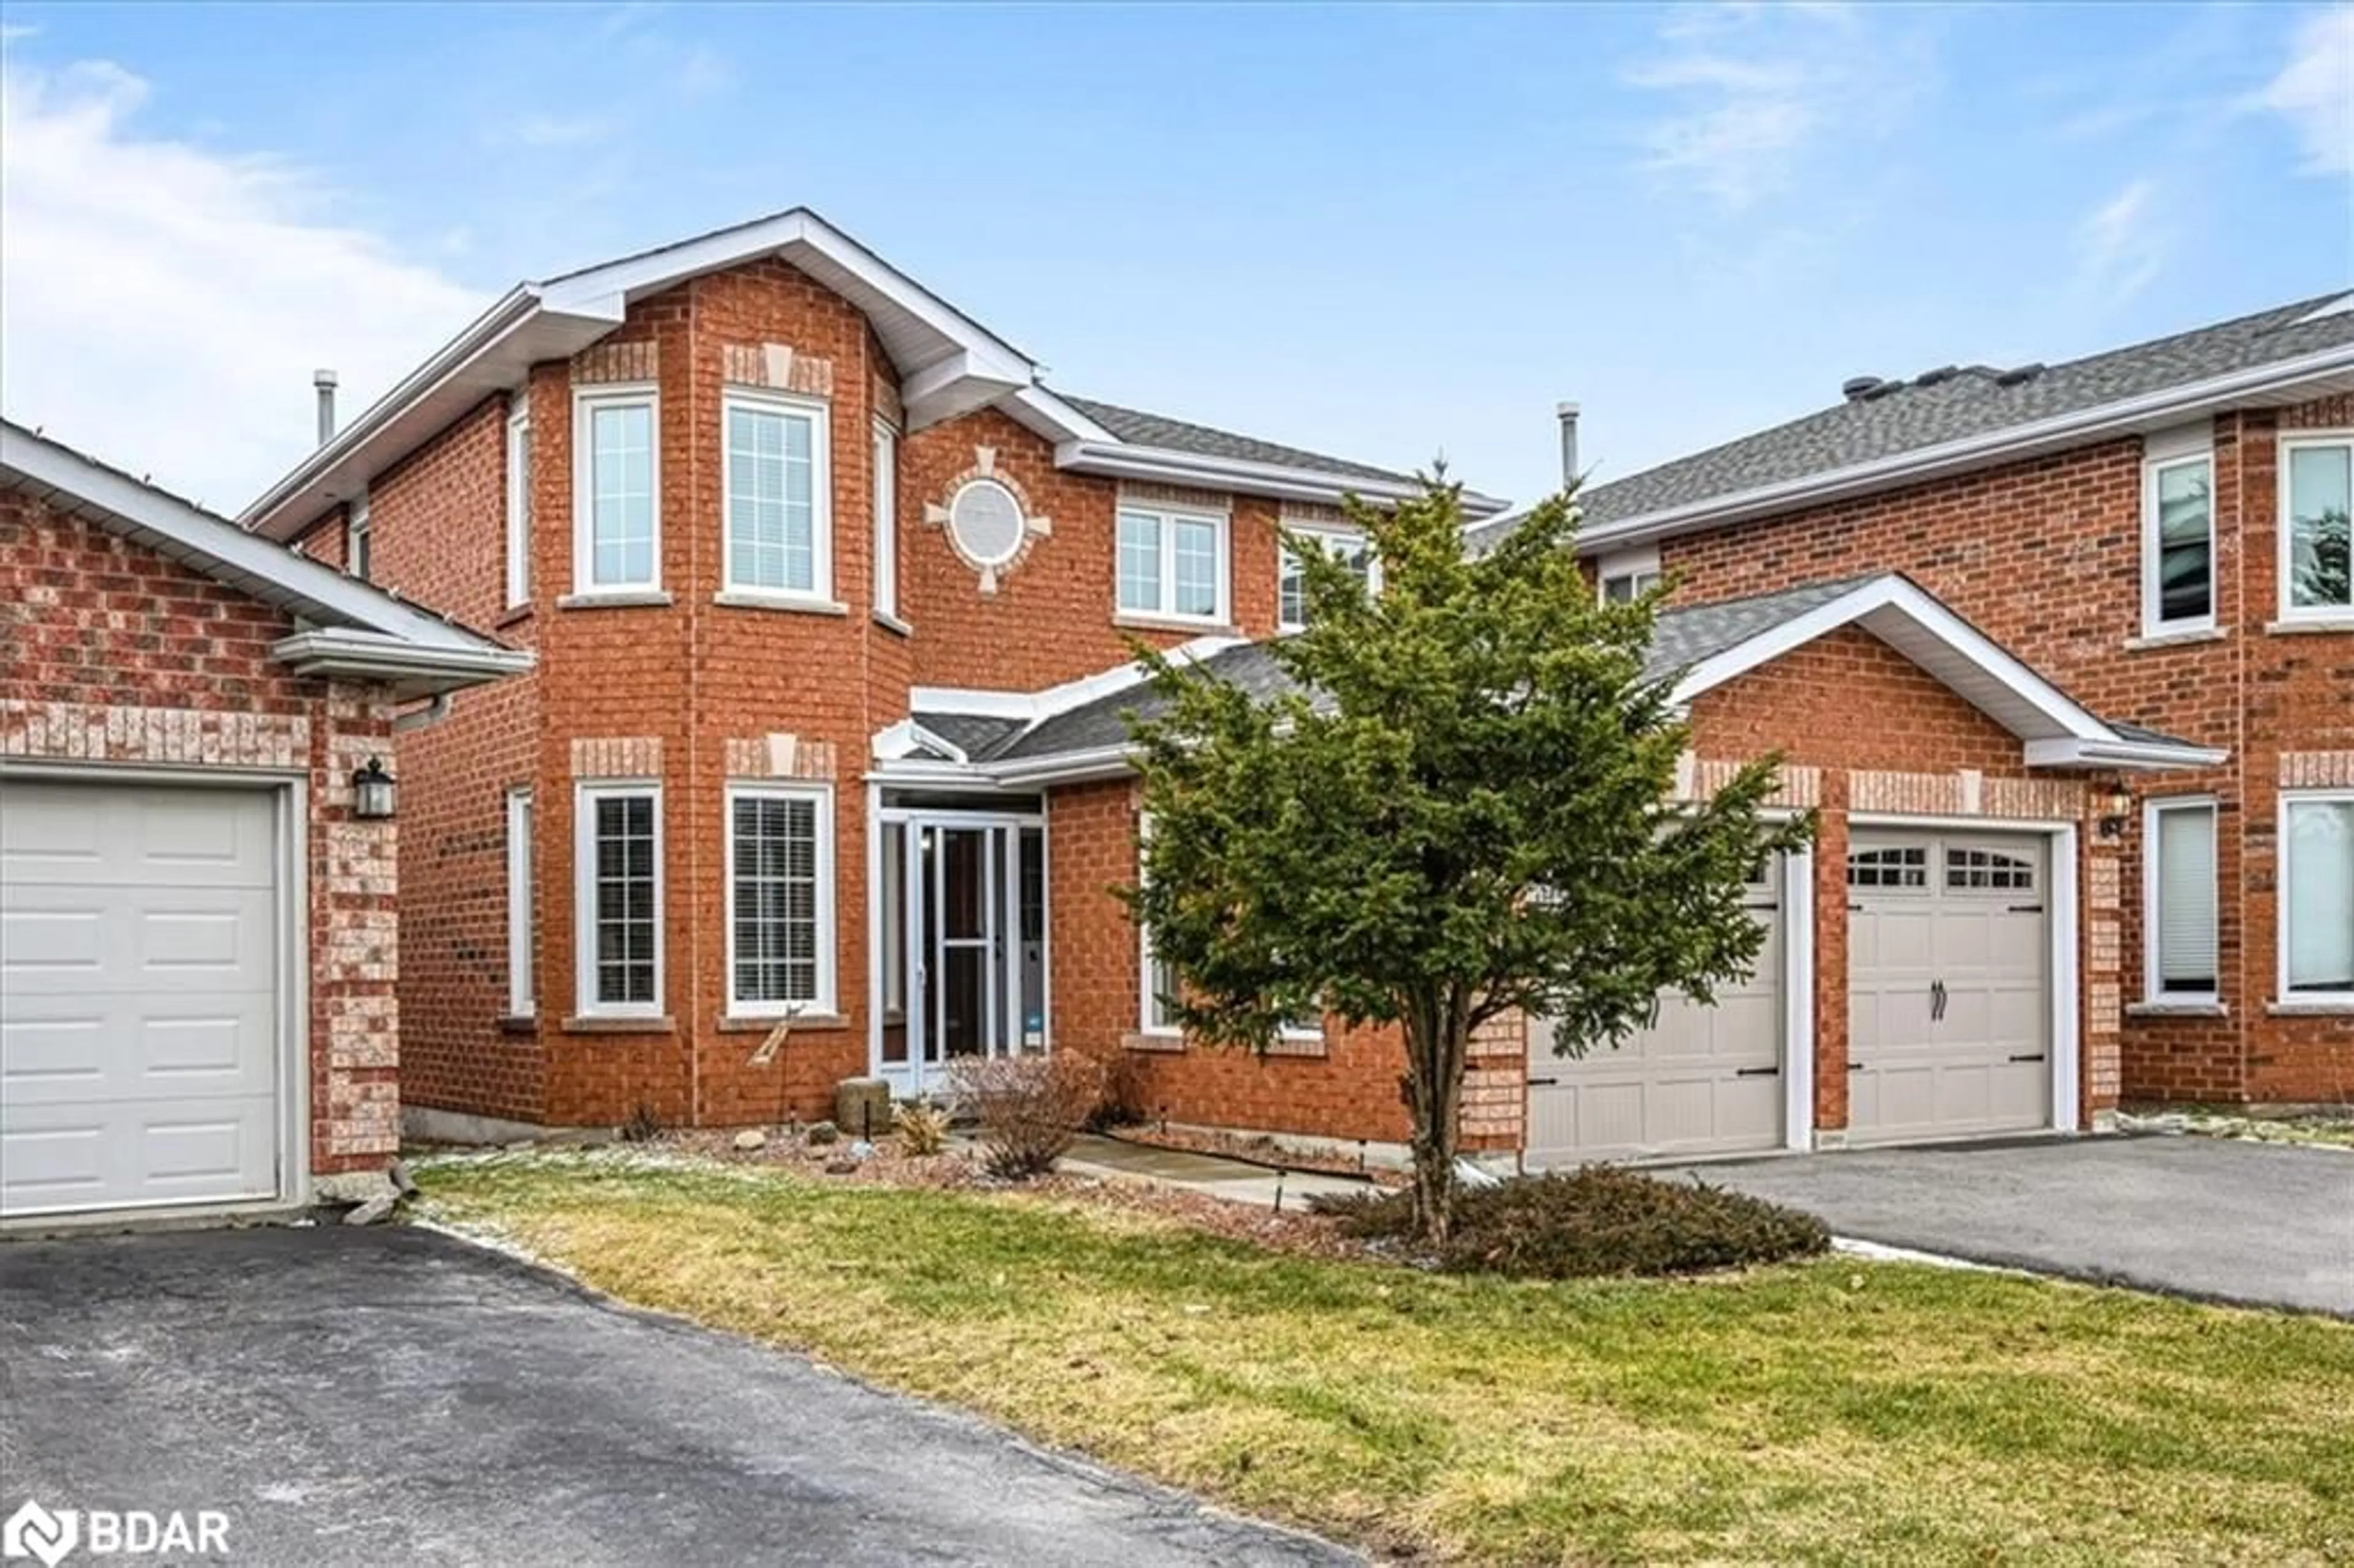 Home with brick exterior material for 9 Lang Dr, Barrie Ontario L4N 7X9